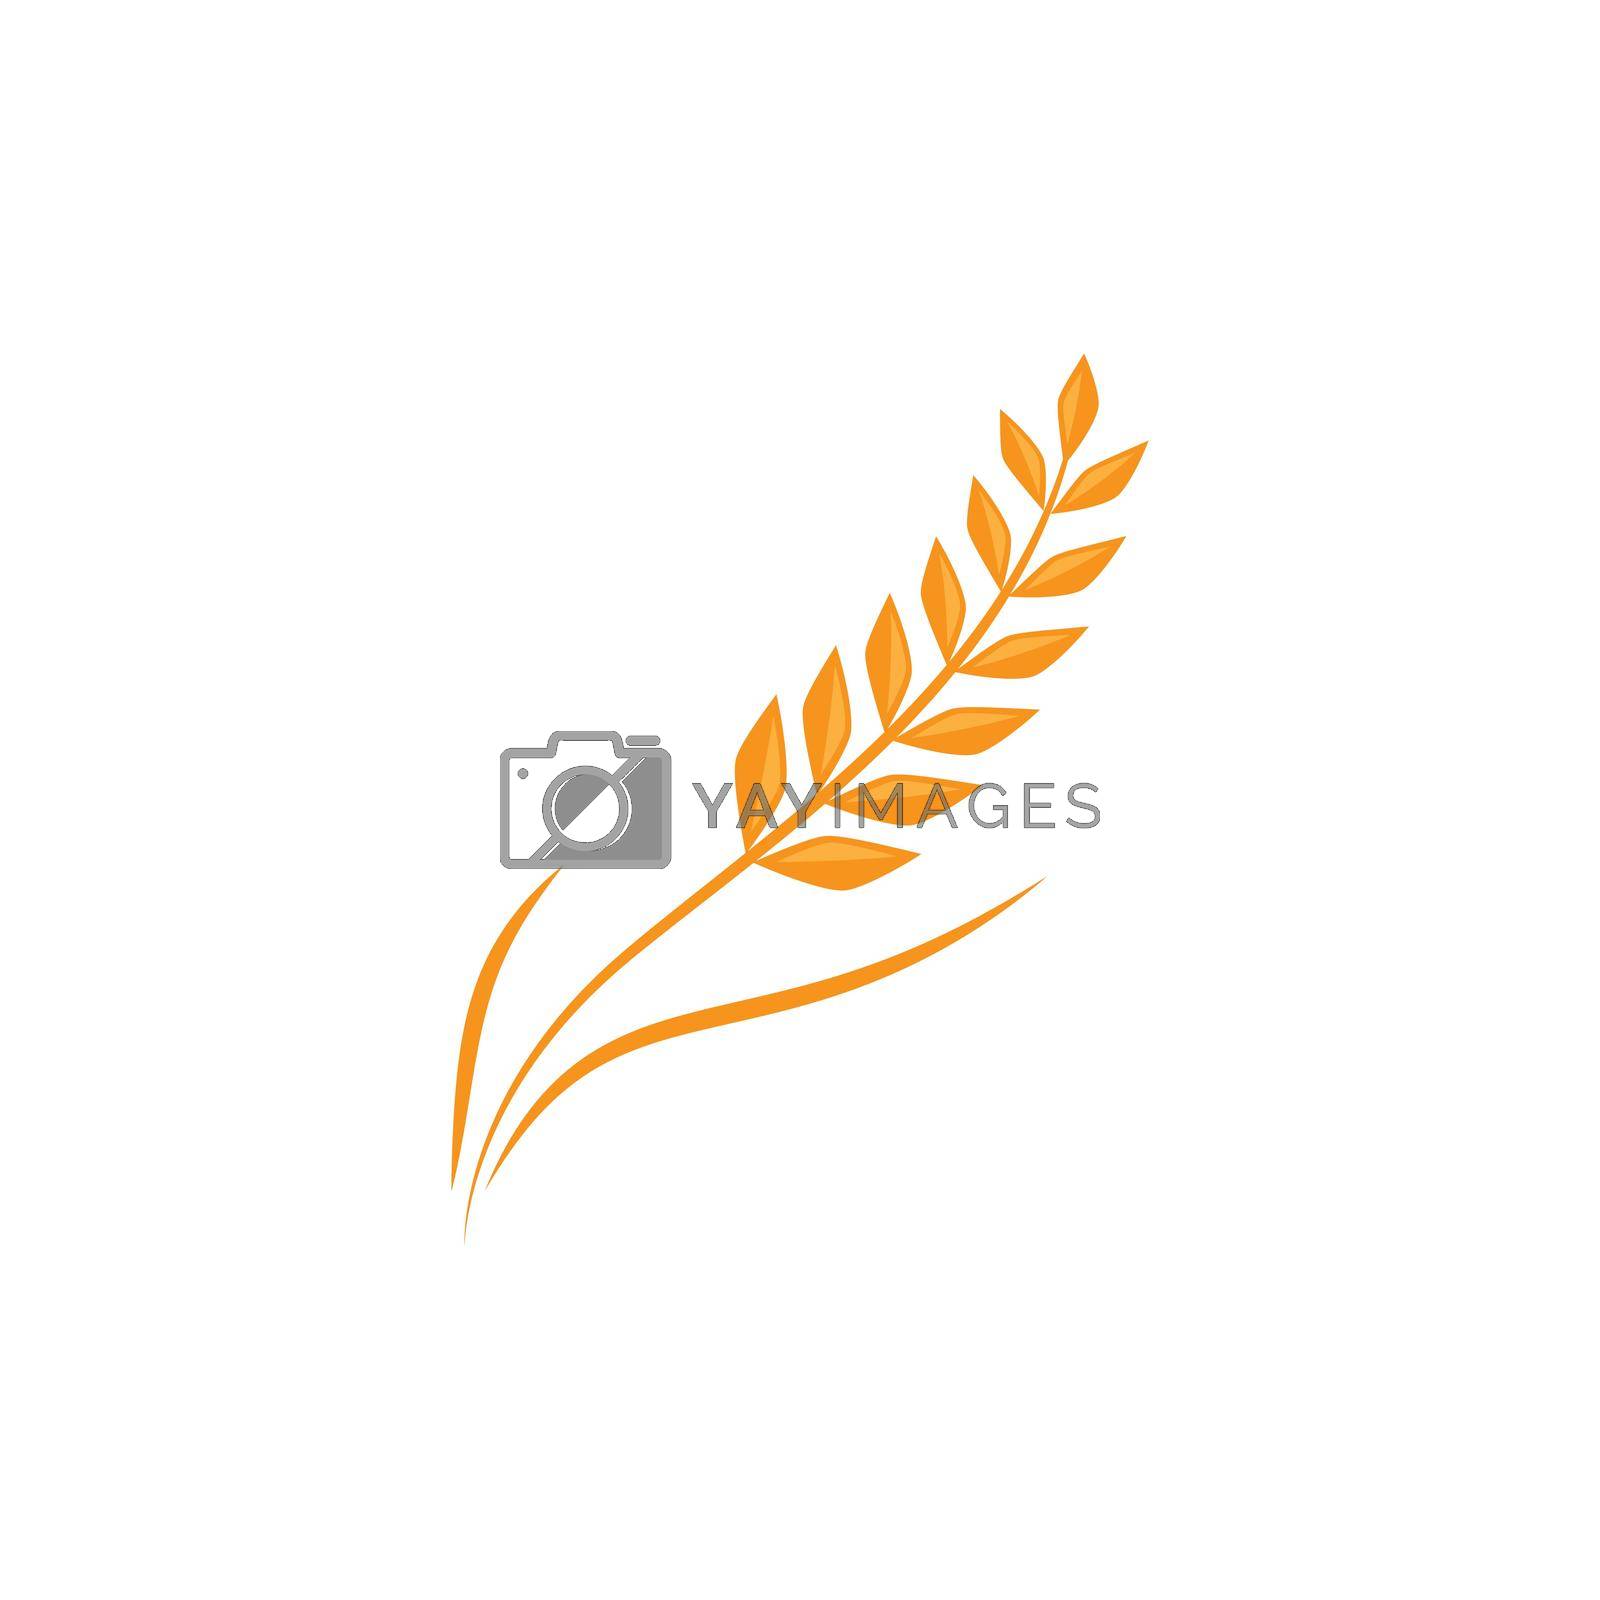 Royalty free image of Wheat illustration design by awk